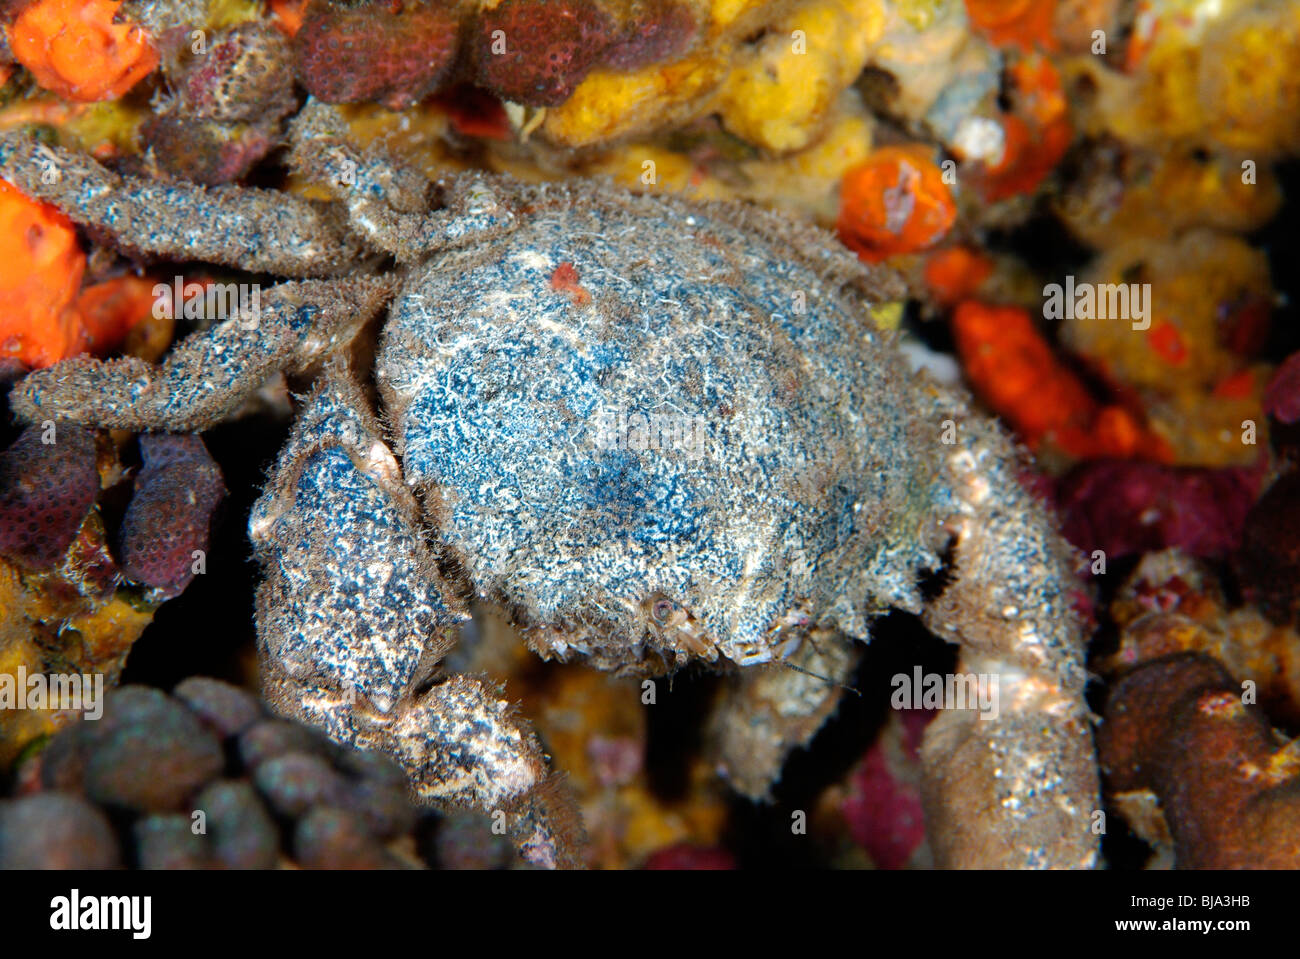 Rough box crab in the Gulf of Mexico Stock Photo